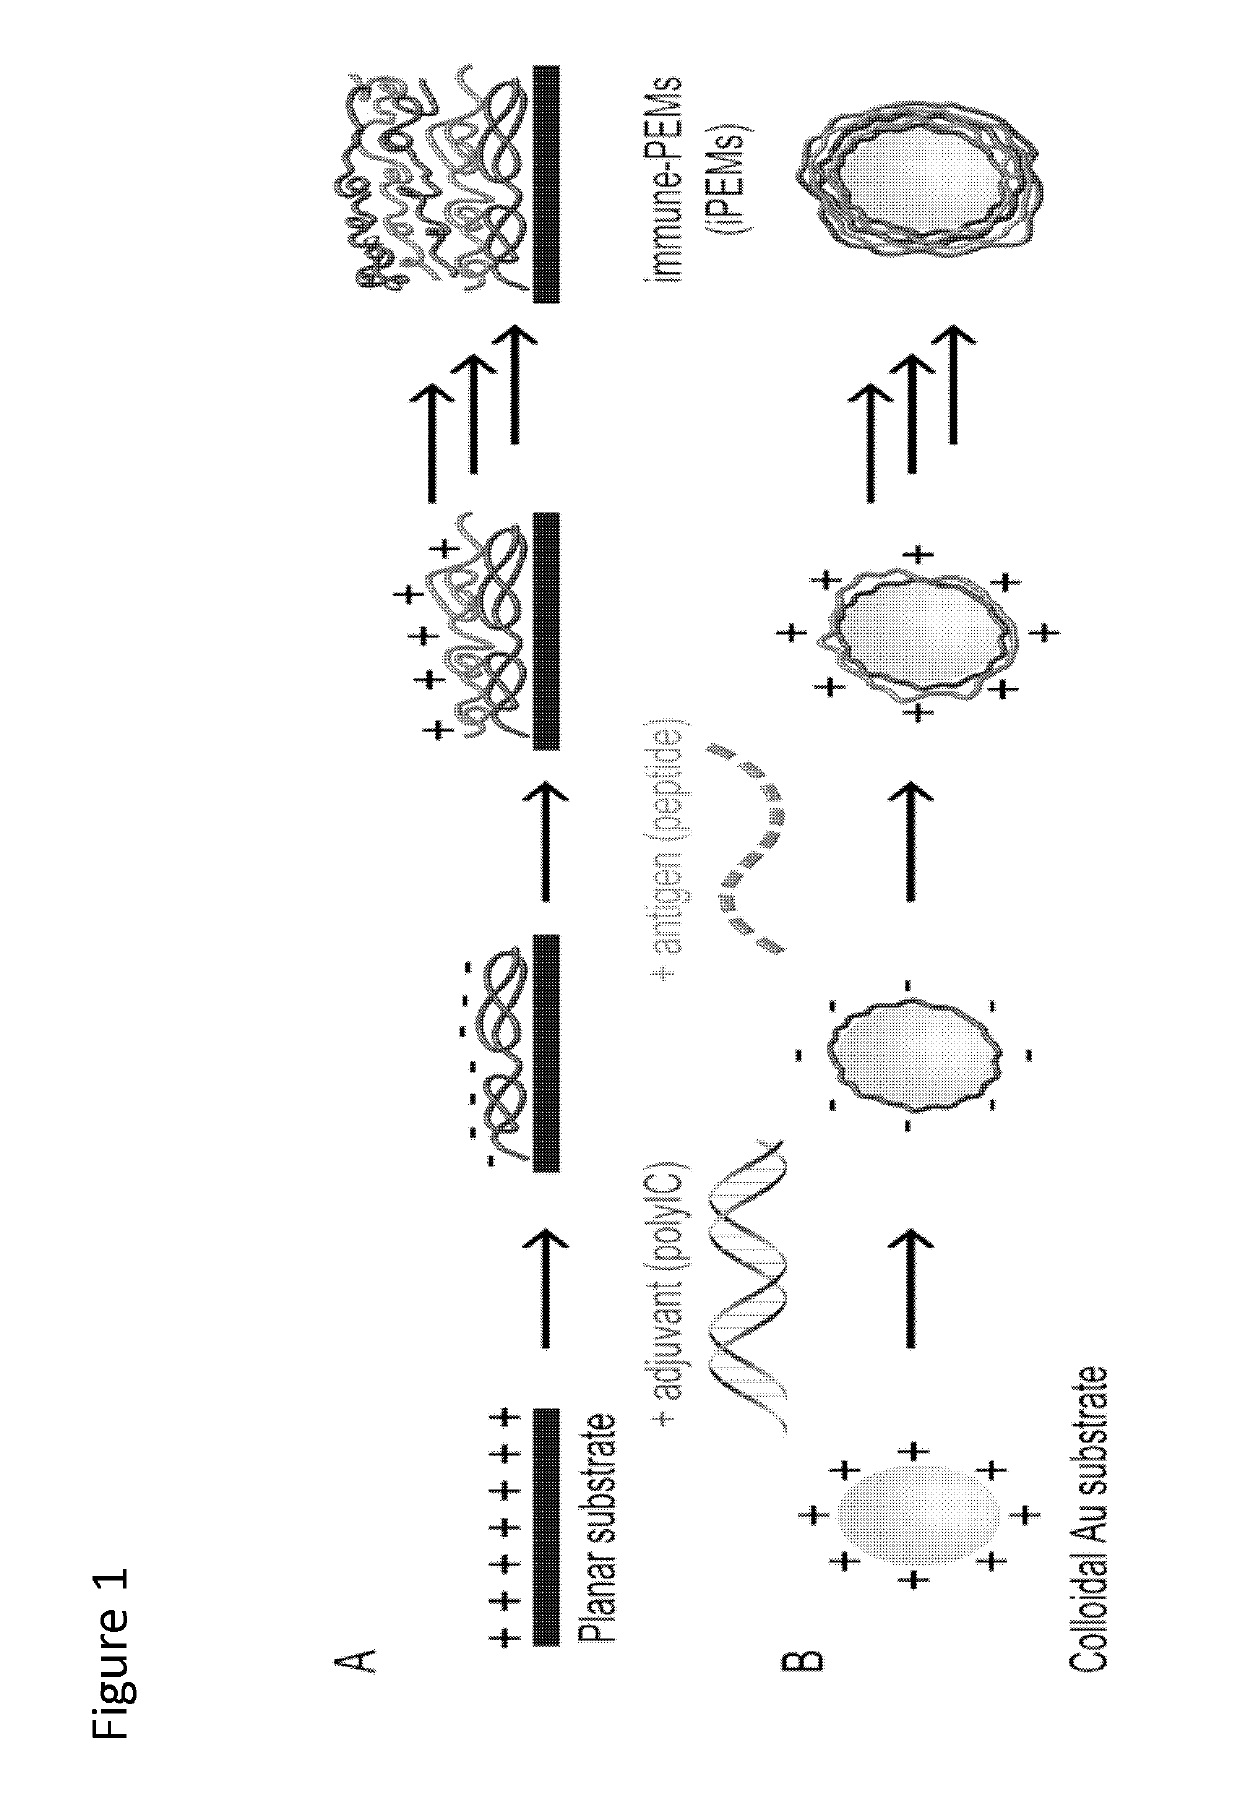 Polyelectrolyte multilayers assembled from immune signal compounds